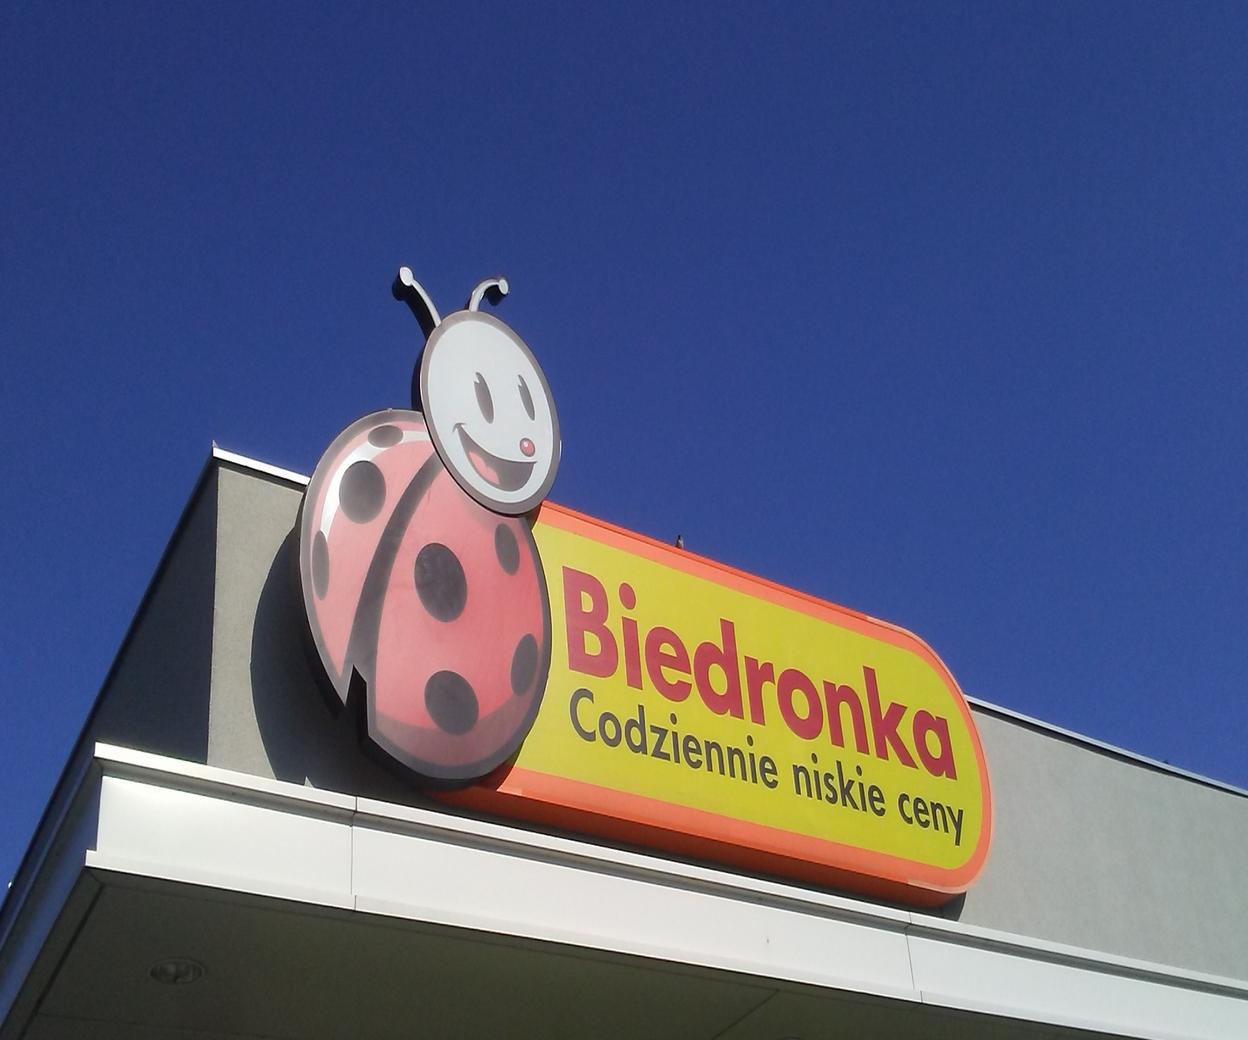 Biedronka is making an exception and will trade on Christmas Eve and holidays.  How long are the stores open?